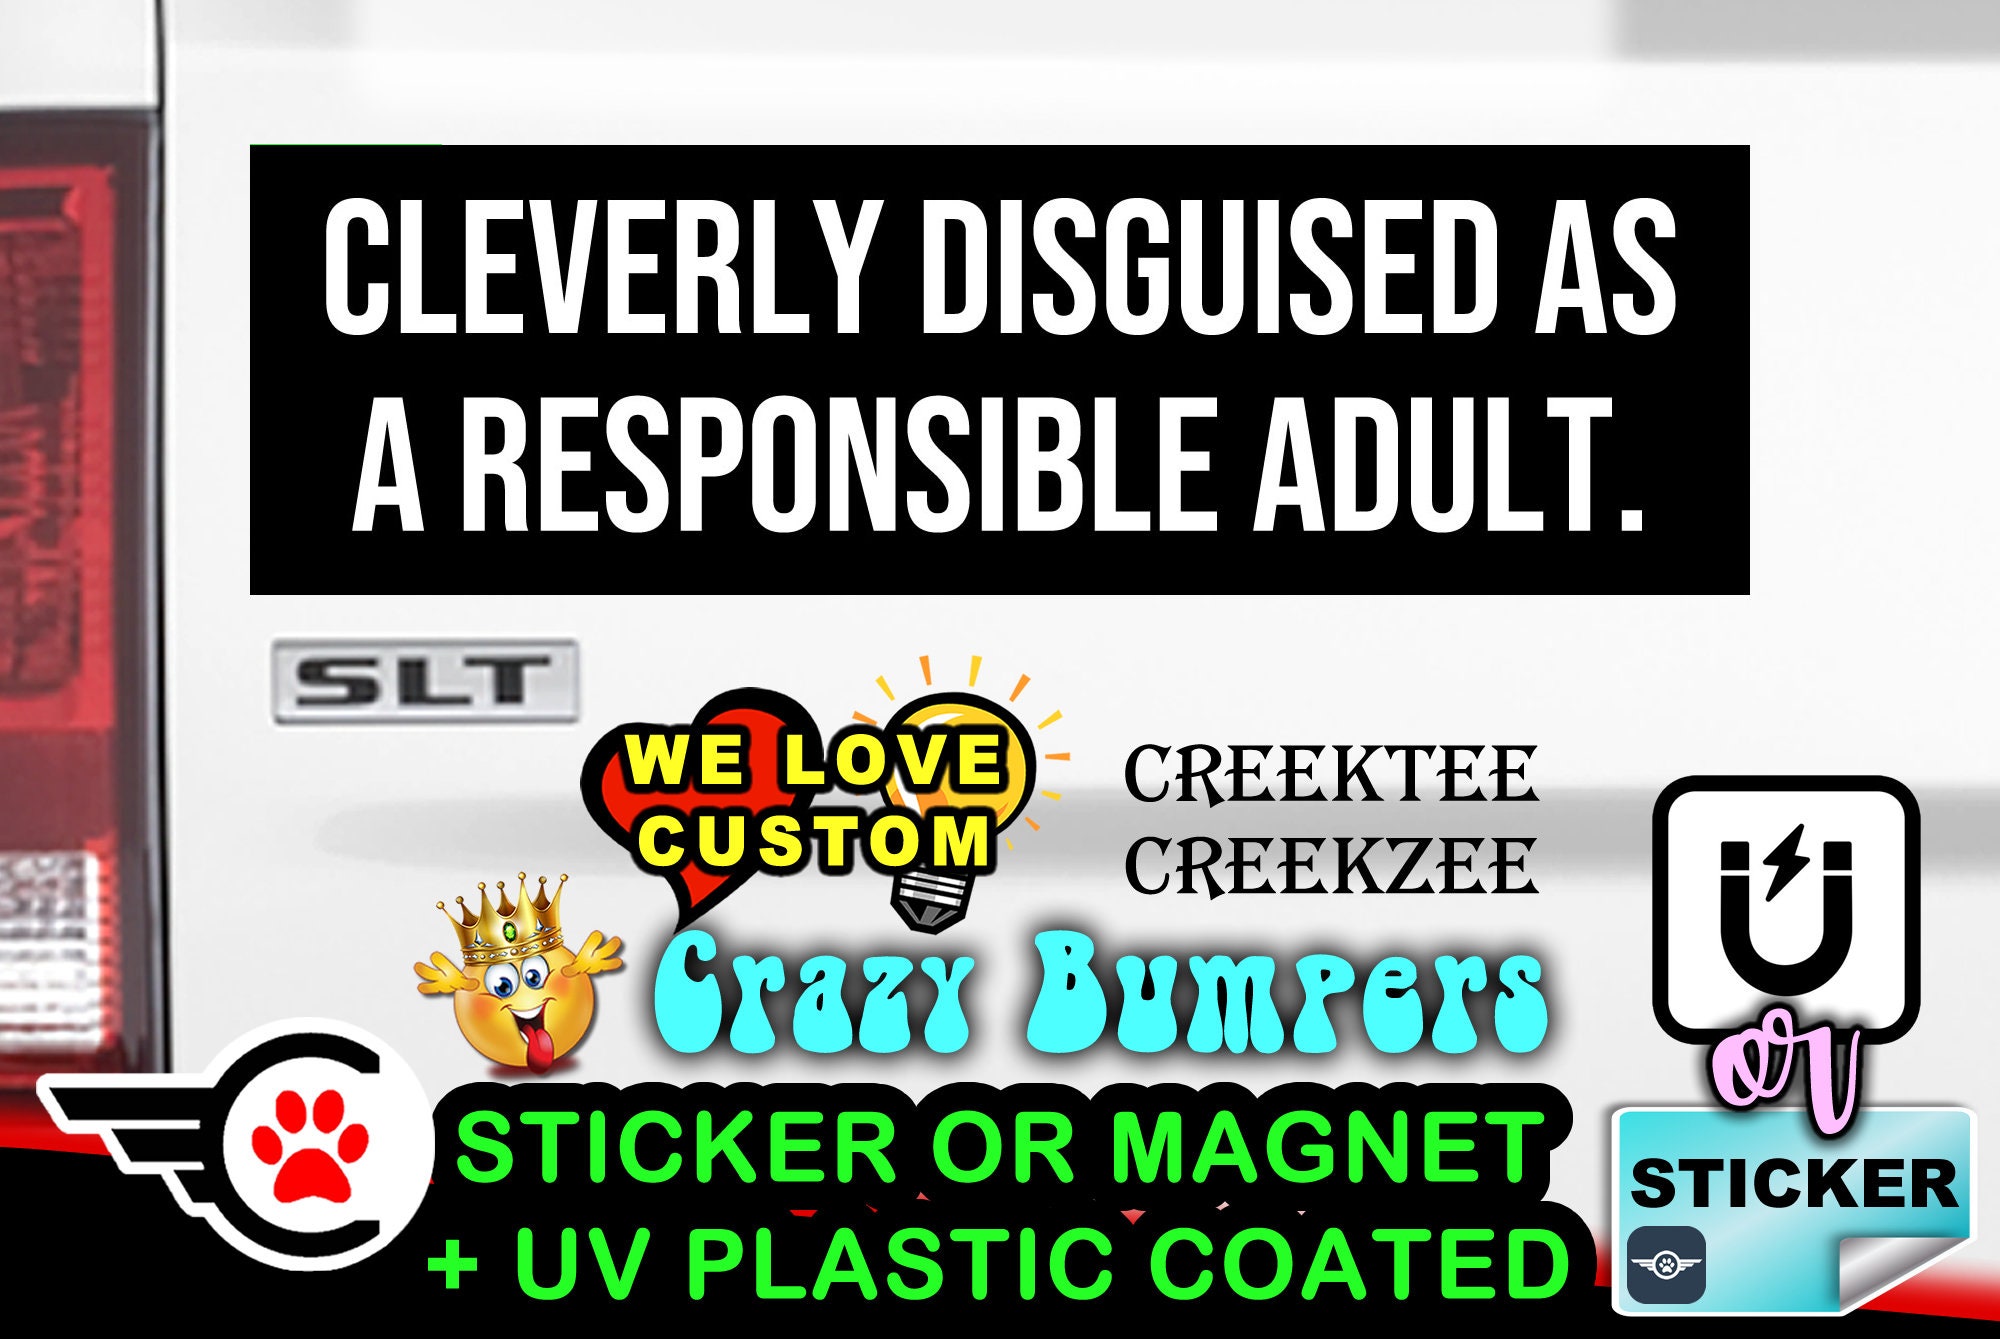 Cleverly disguised as a responsible adult - Funny Bumper Sticker or Magnet 4